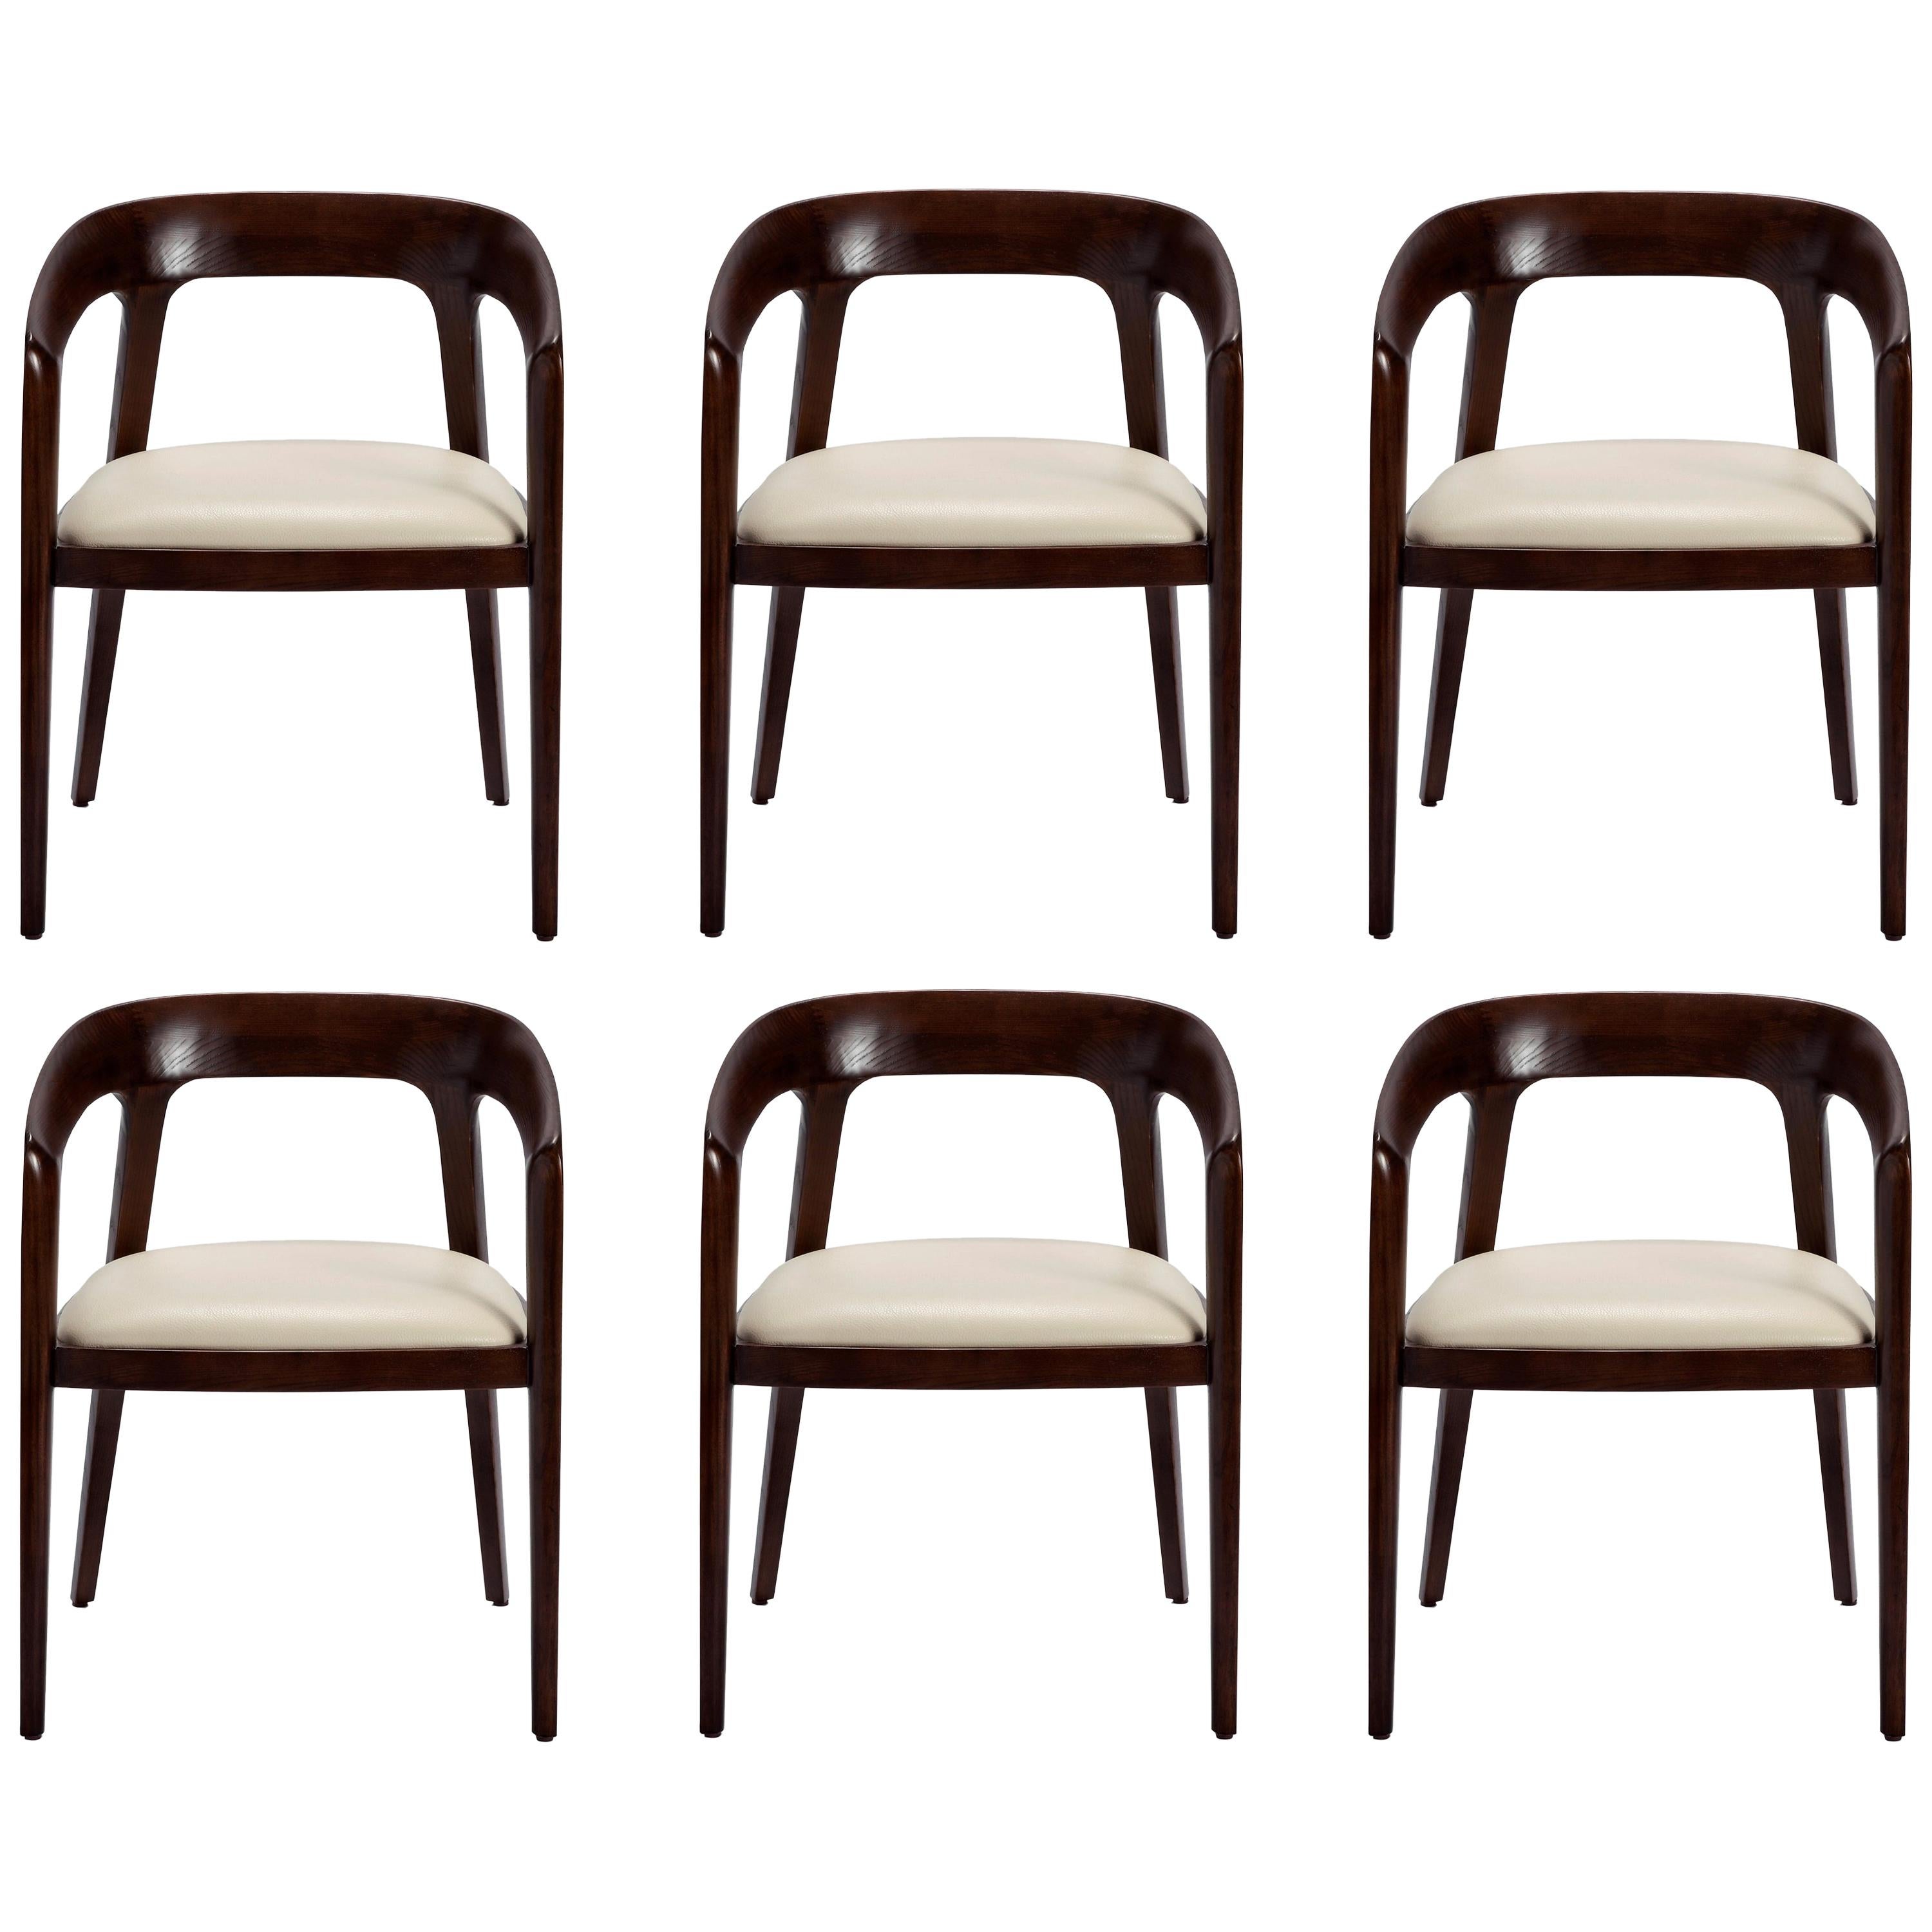 Set of 6, Scandinavian Style Dining Chairs in Dark Walnut and Beige Finish